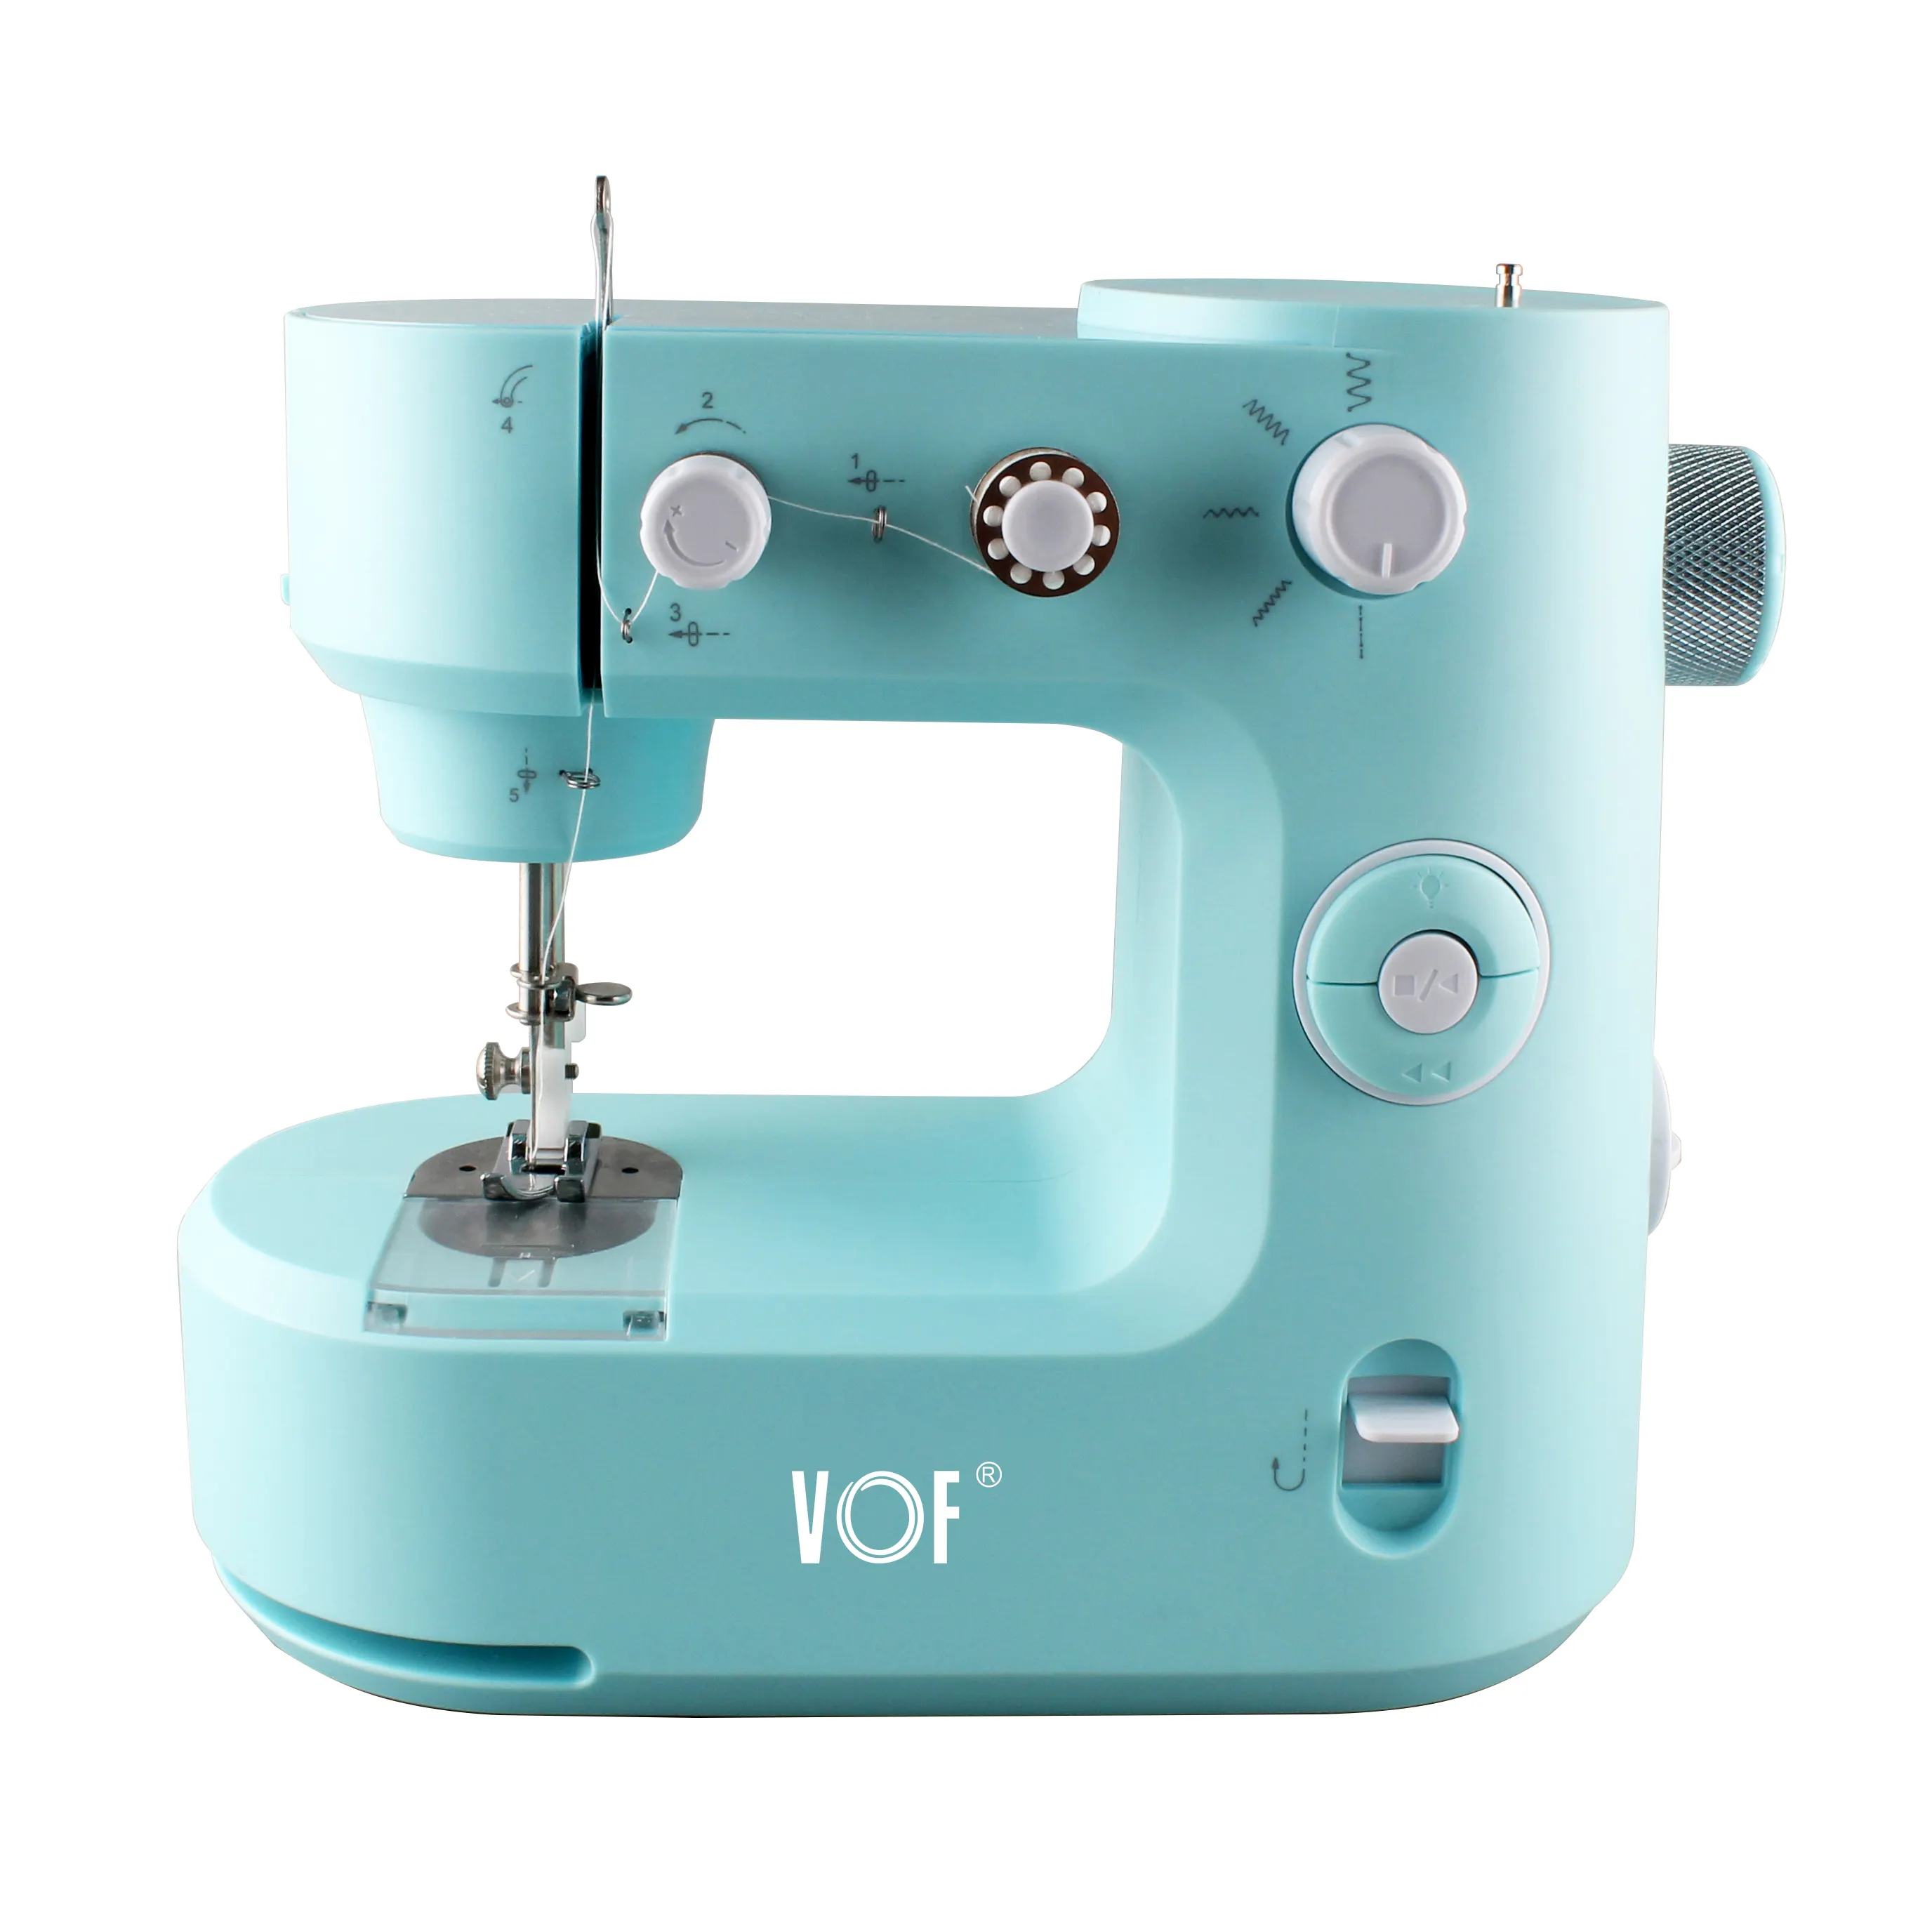 FHSM-398 5 Stitches Easy Stitches Forward And Reverse Sewing Machine